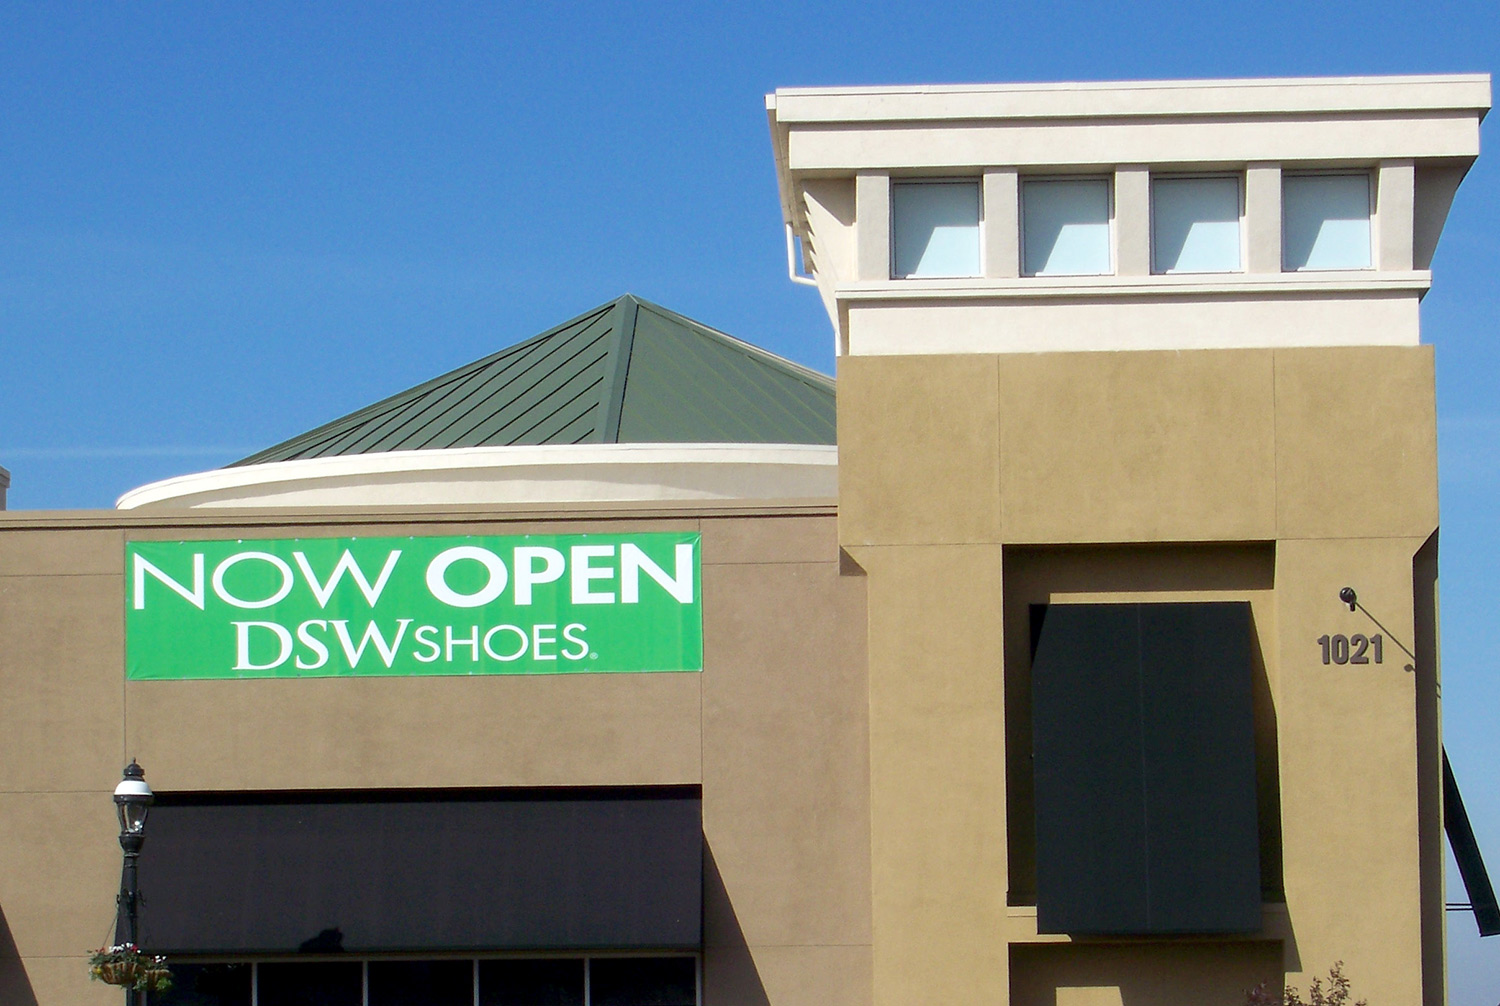 dsw-shoes-seale-signs-roseville-ca